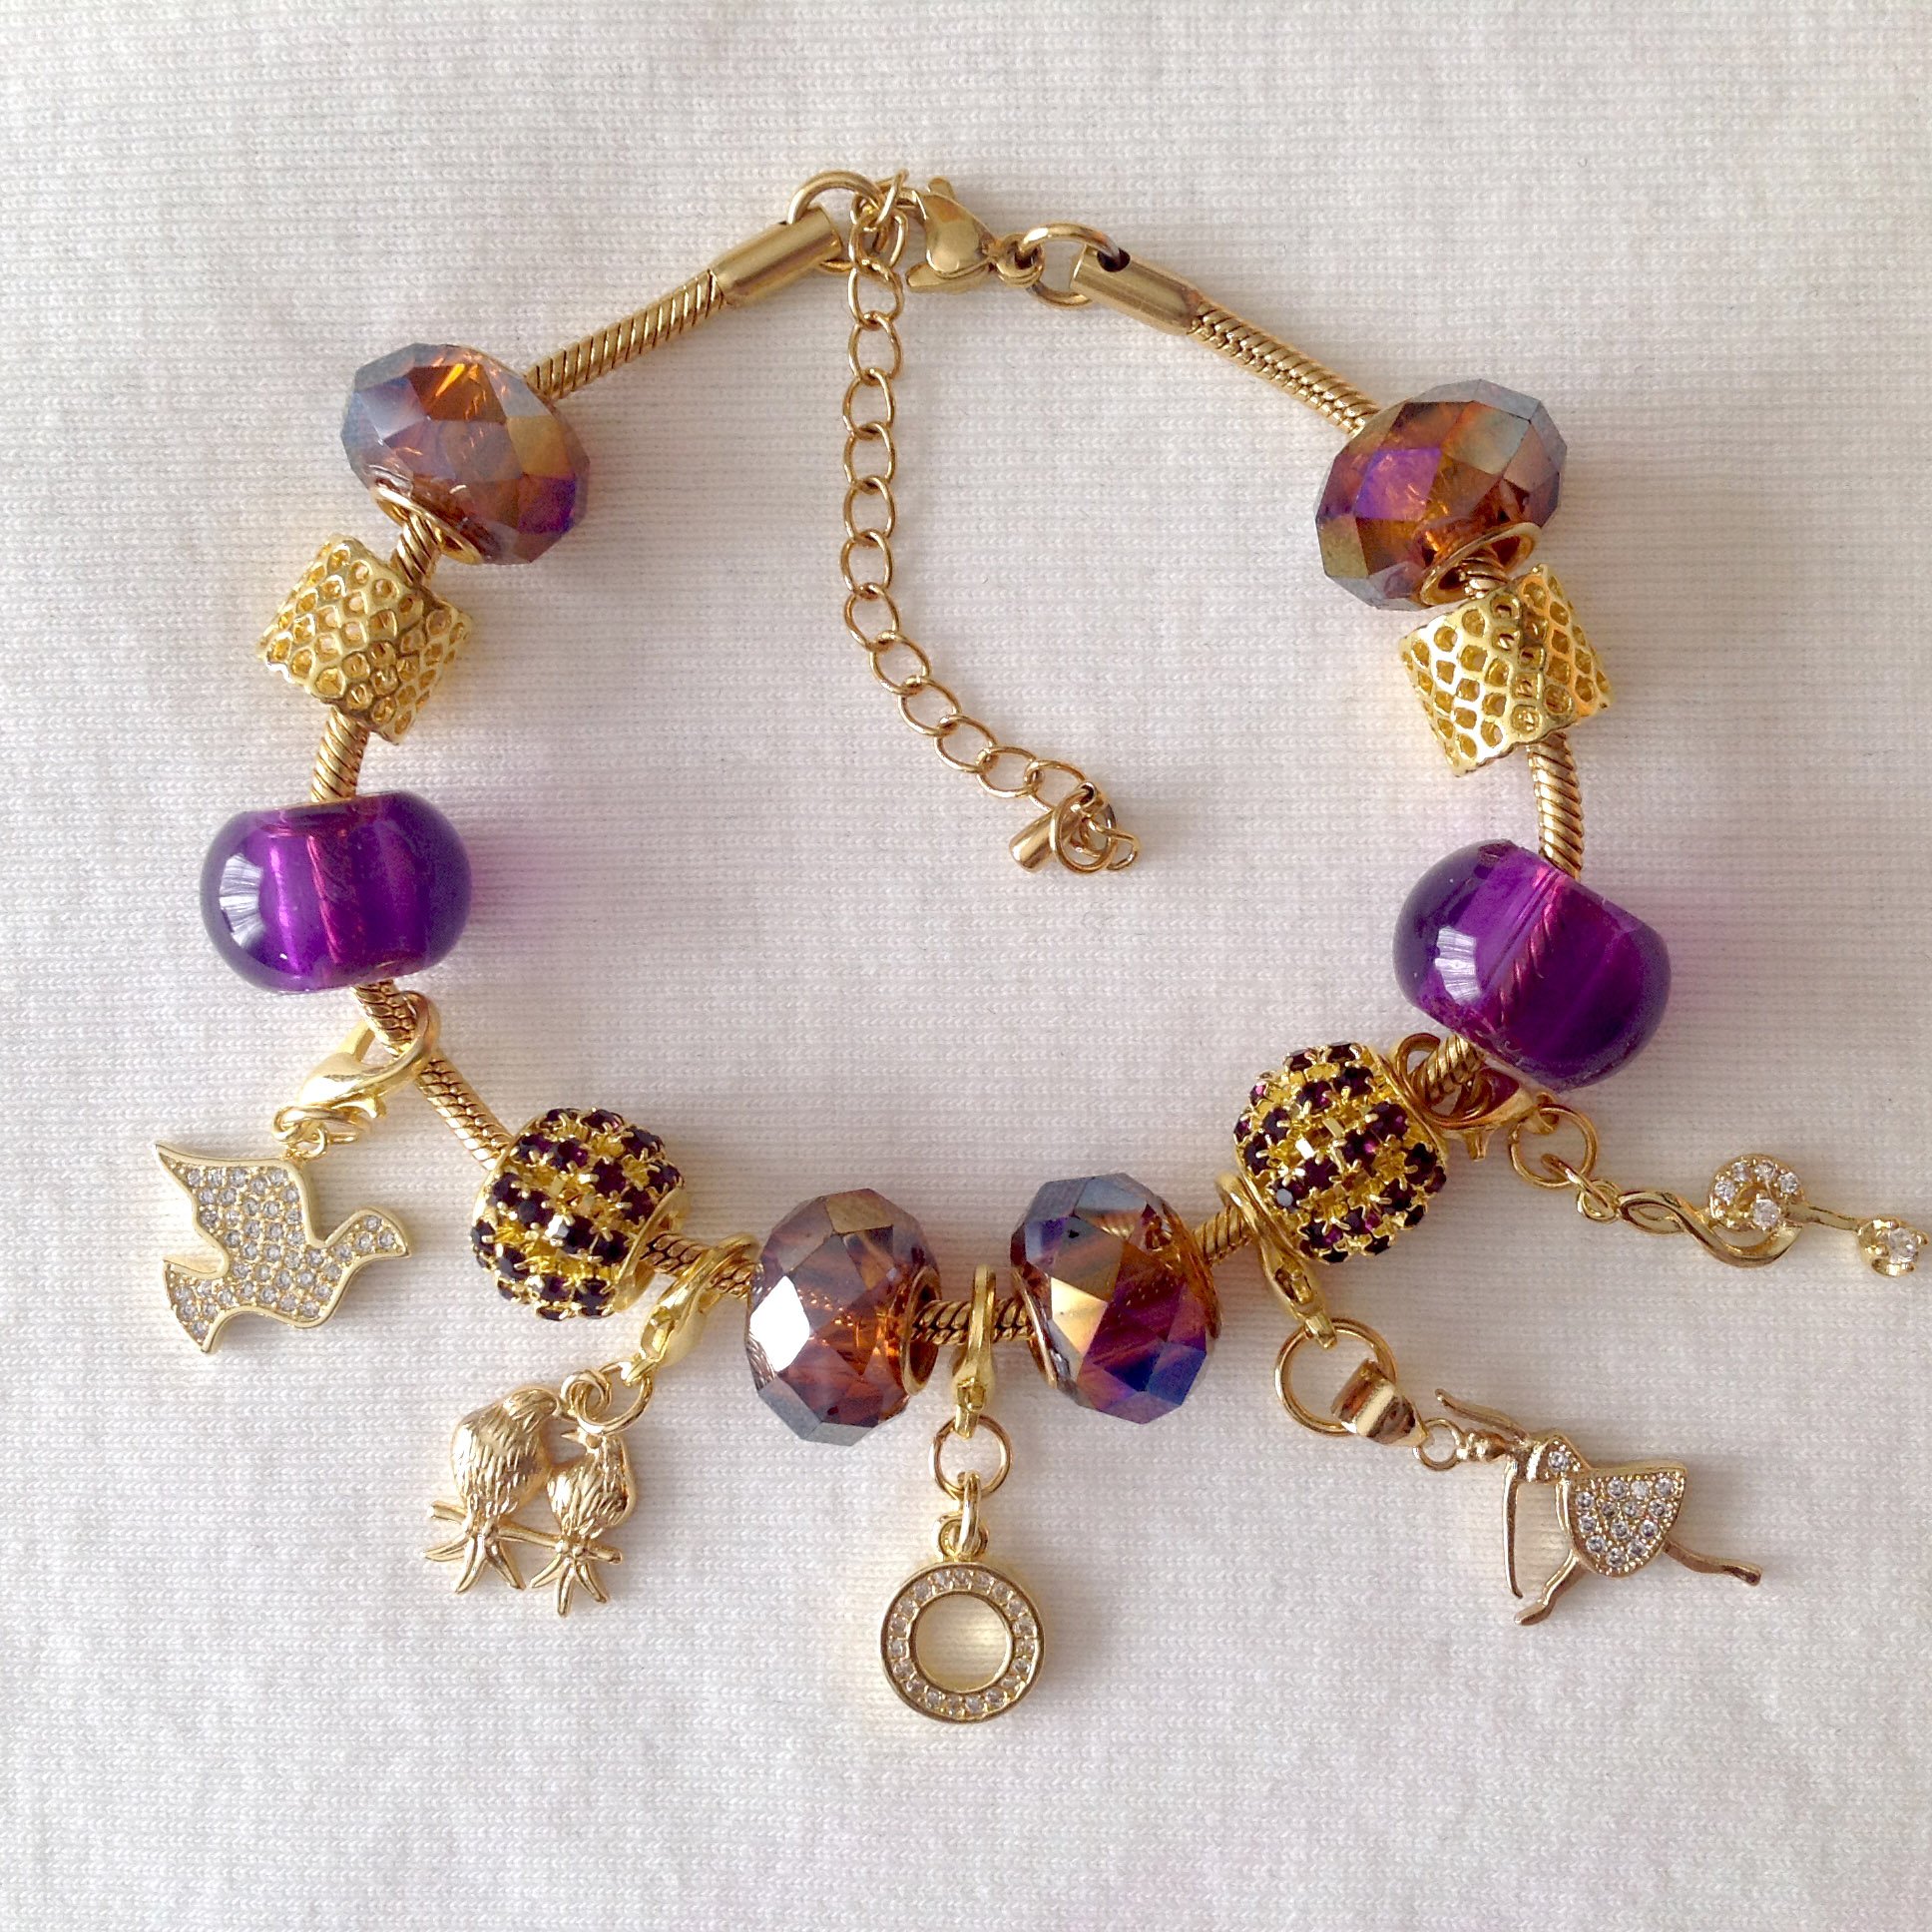 Days of Christmas Cubic Zirconia European Style Charm Bracelet in Gold, Purple and White